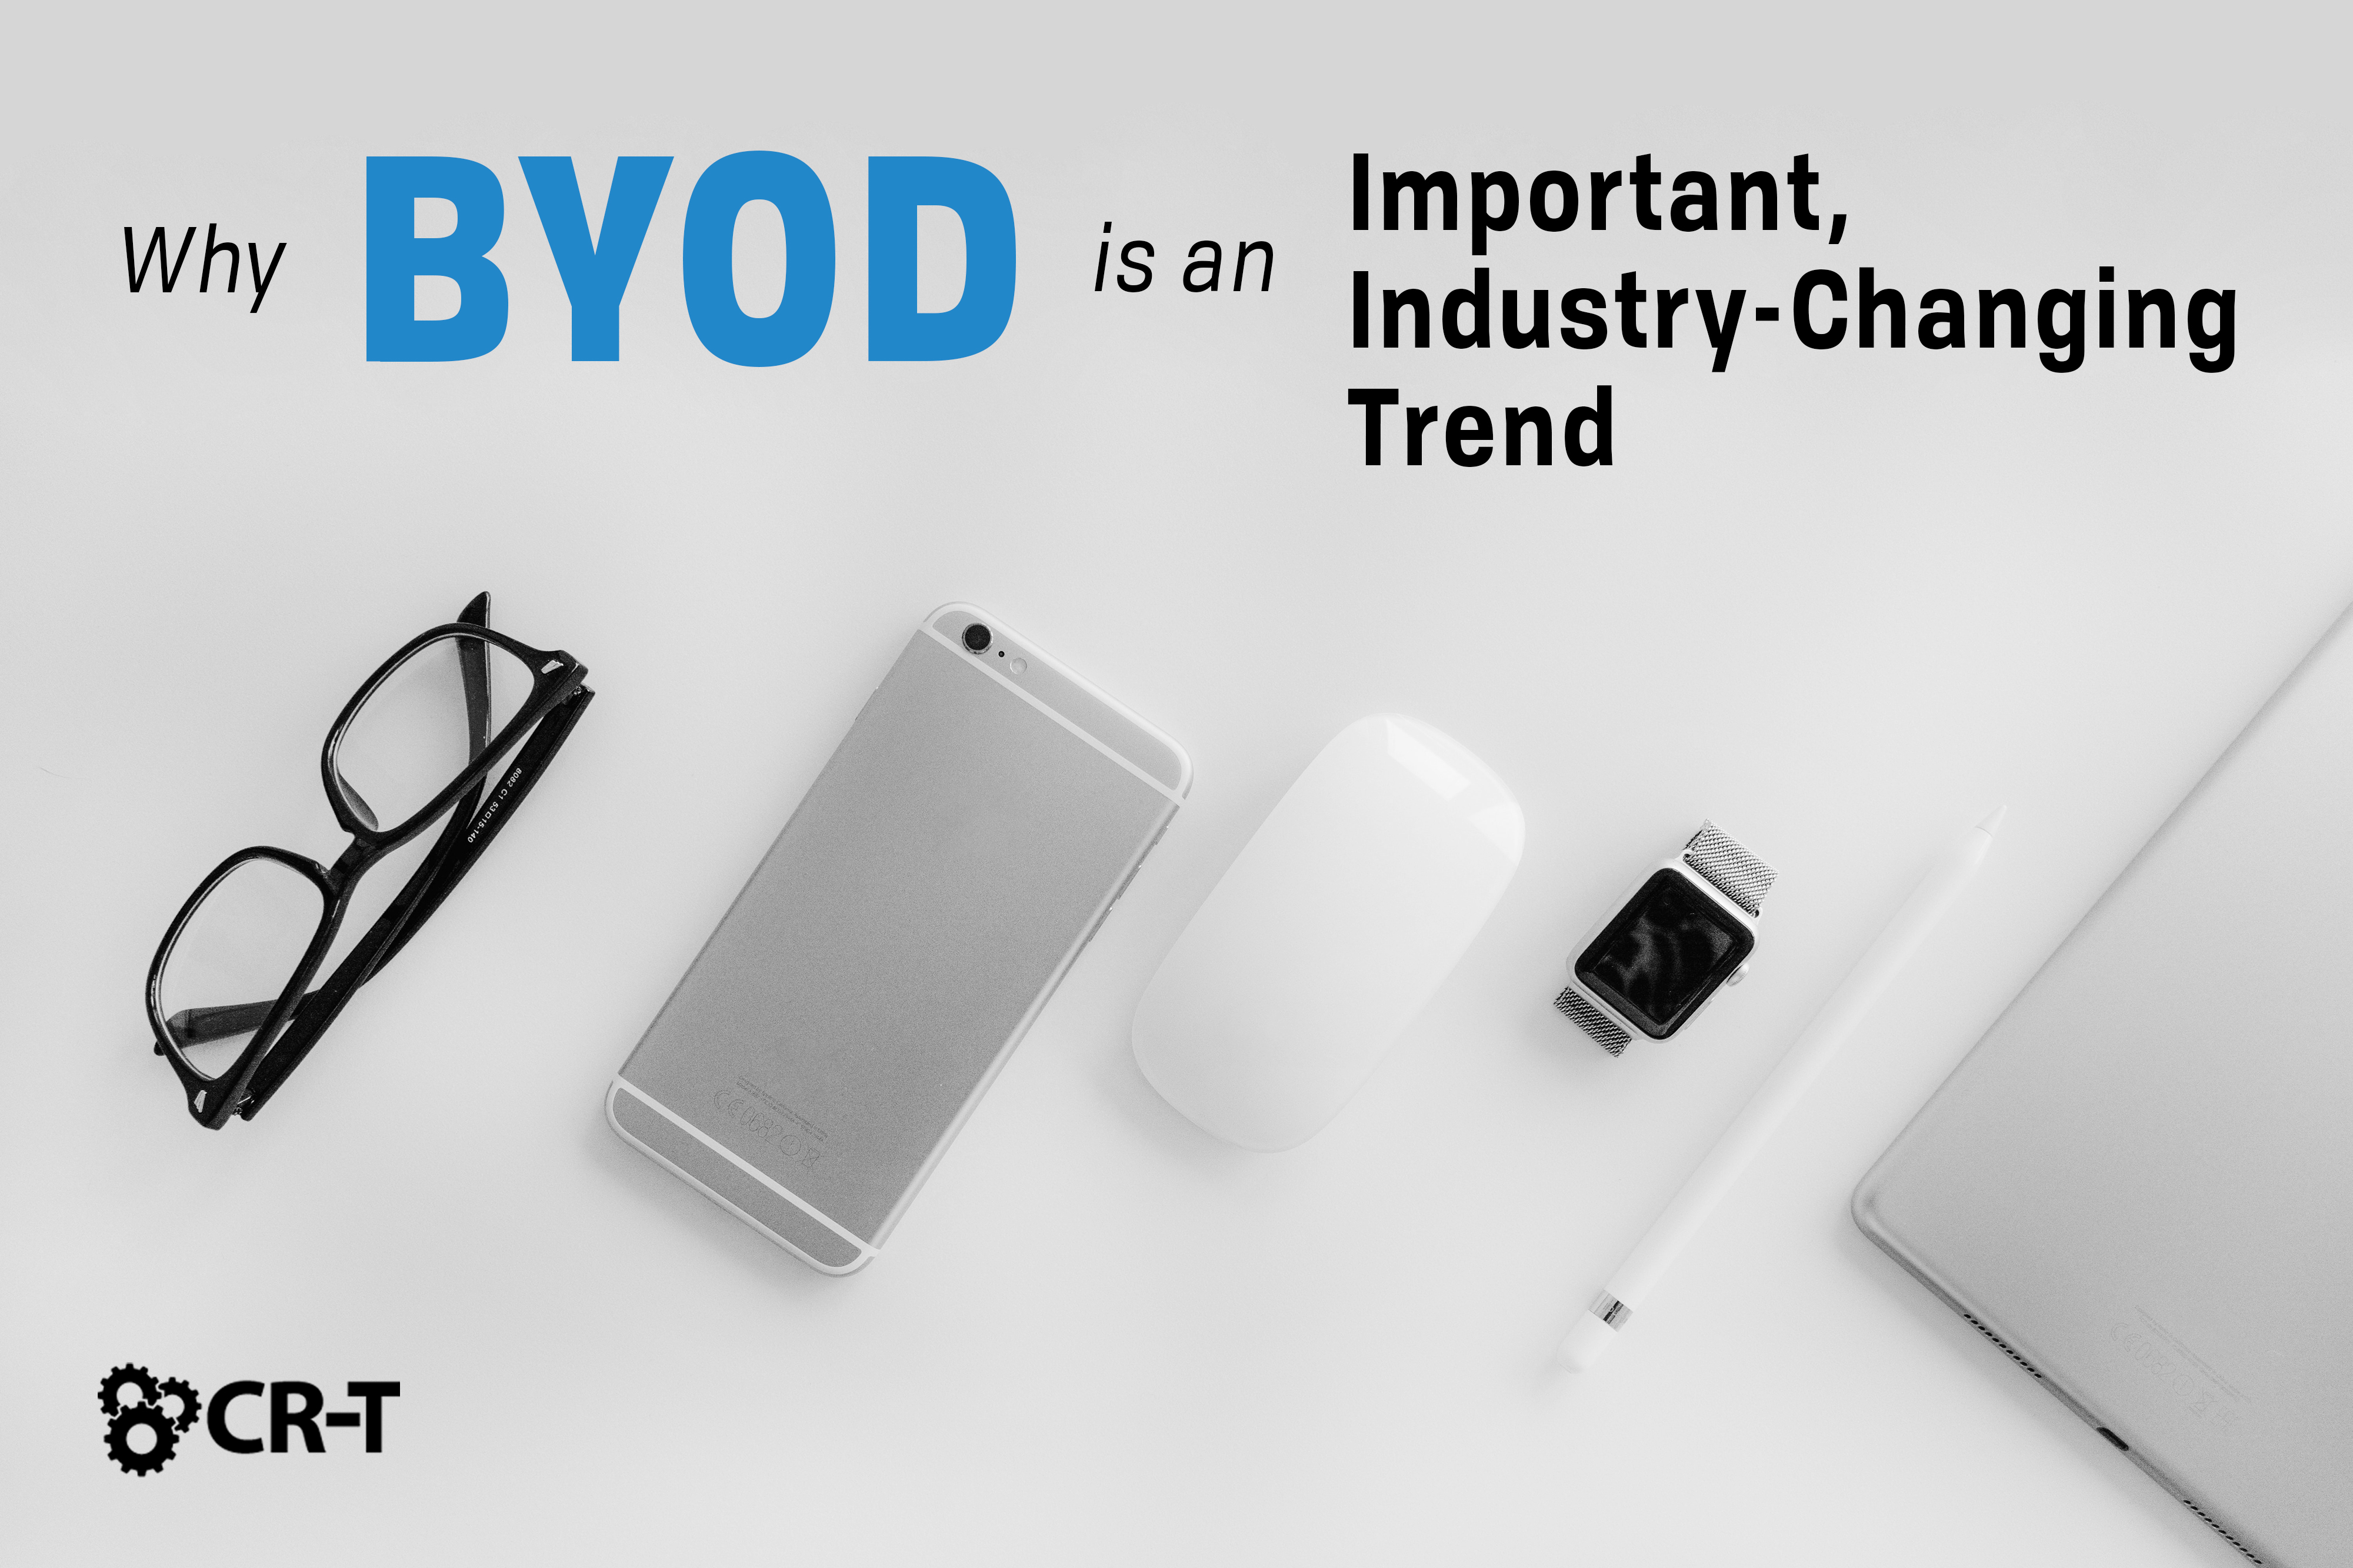 You are currently viewing Why BYOD is an Important Industry-Changing Trend